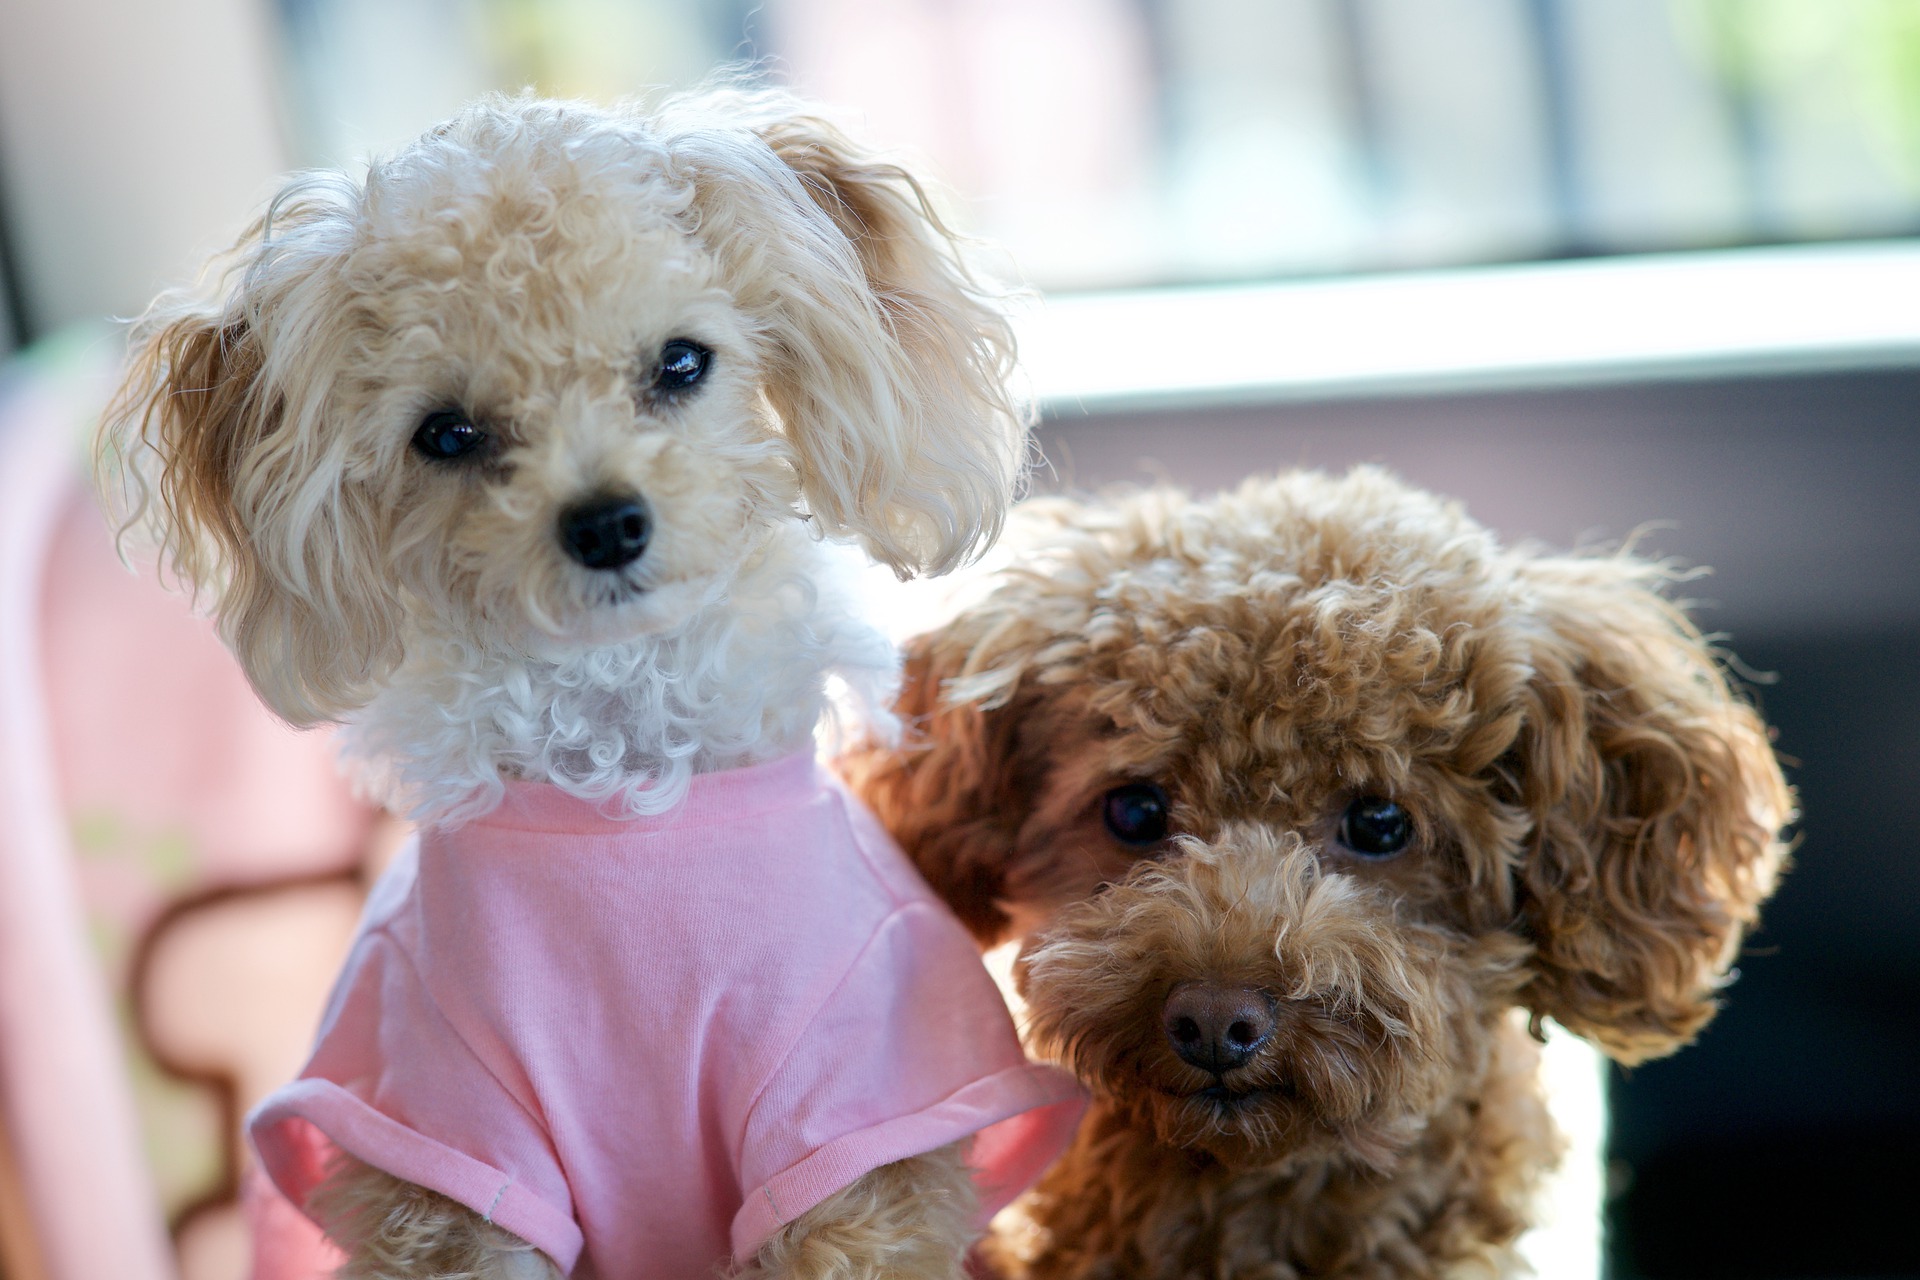 Full Grown Teacup Poodle: How Big Do They Get (+Photos)